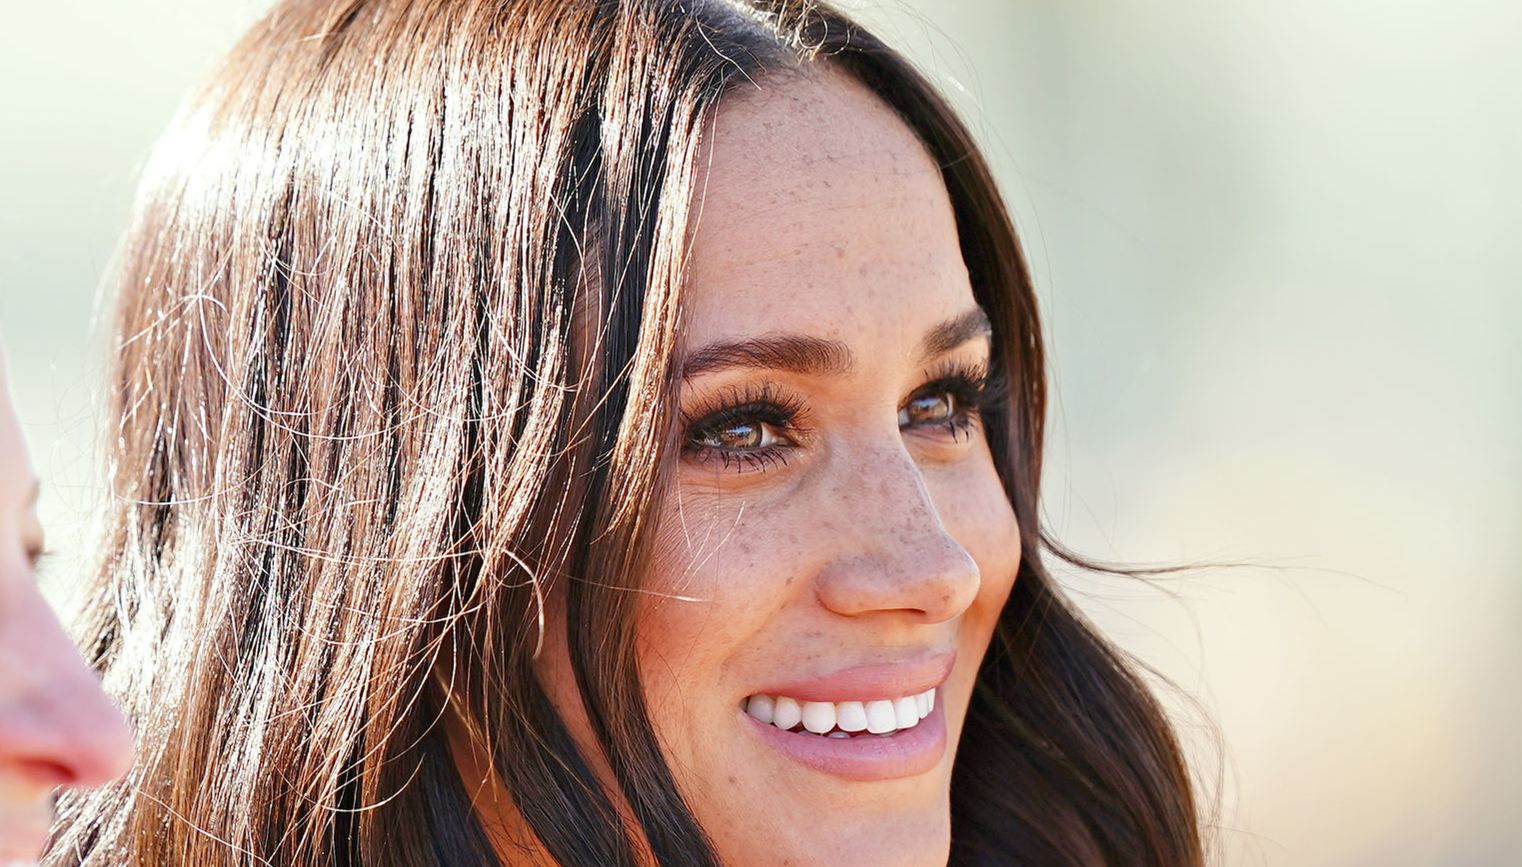 Meghan Markle has been dubbed %22The Princess of Montecito%22 by locals